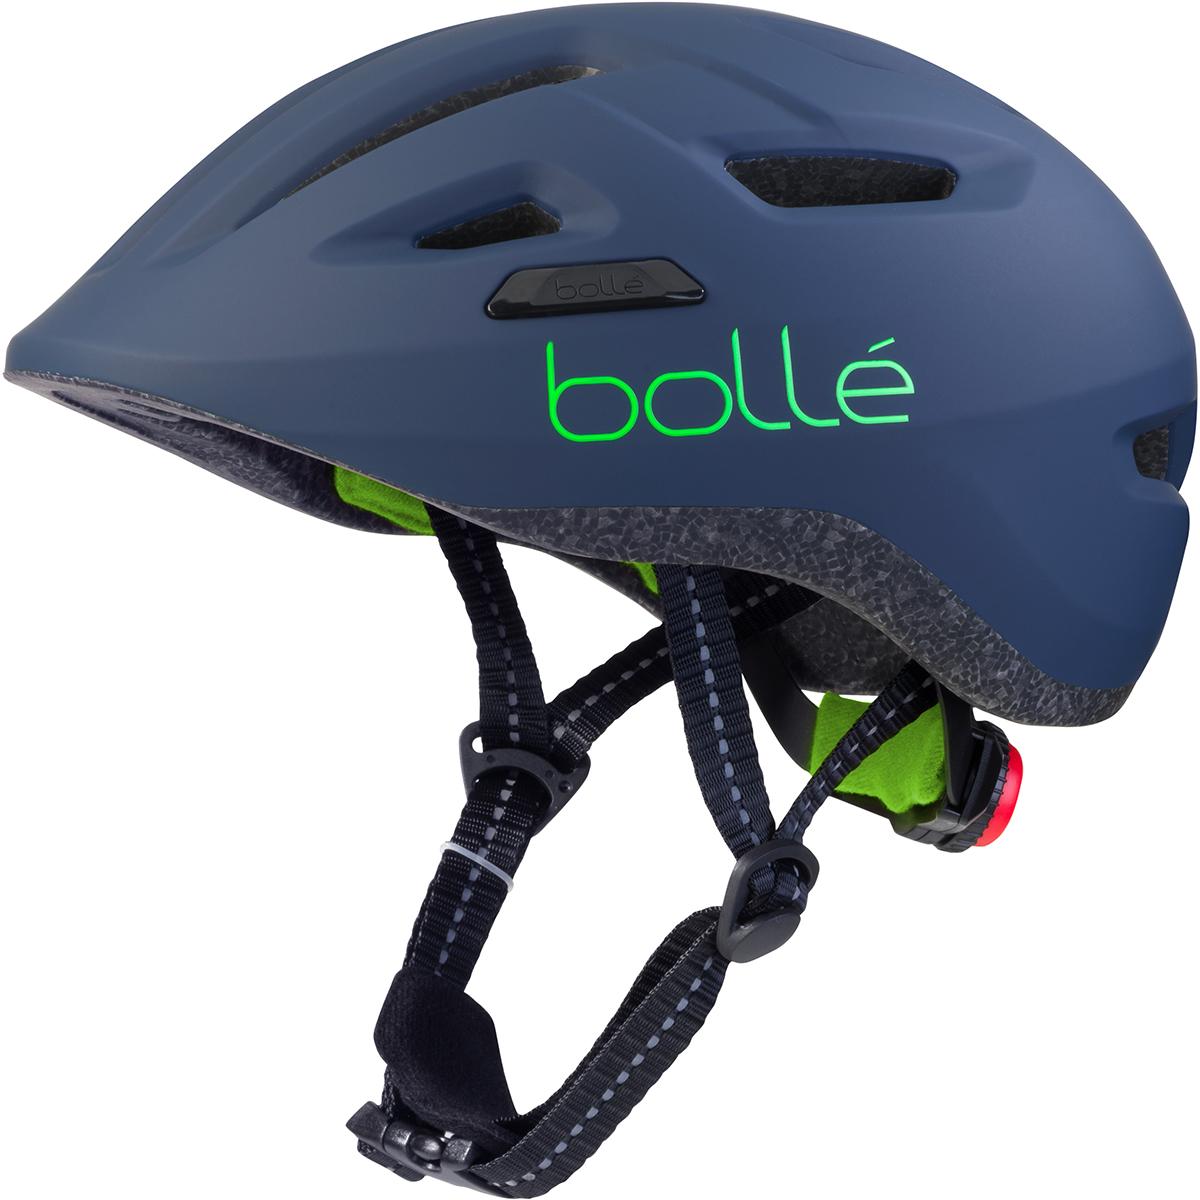 Bolle Stance Jr Cycling Helmet  Navy Matte Extra Small XS 47-51